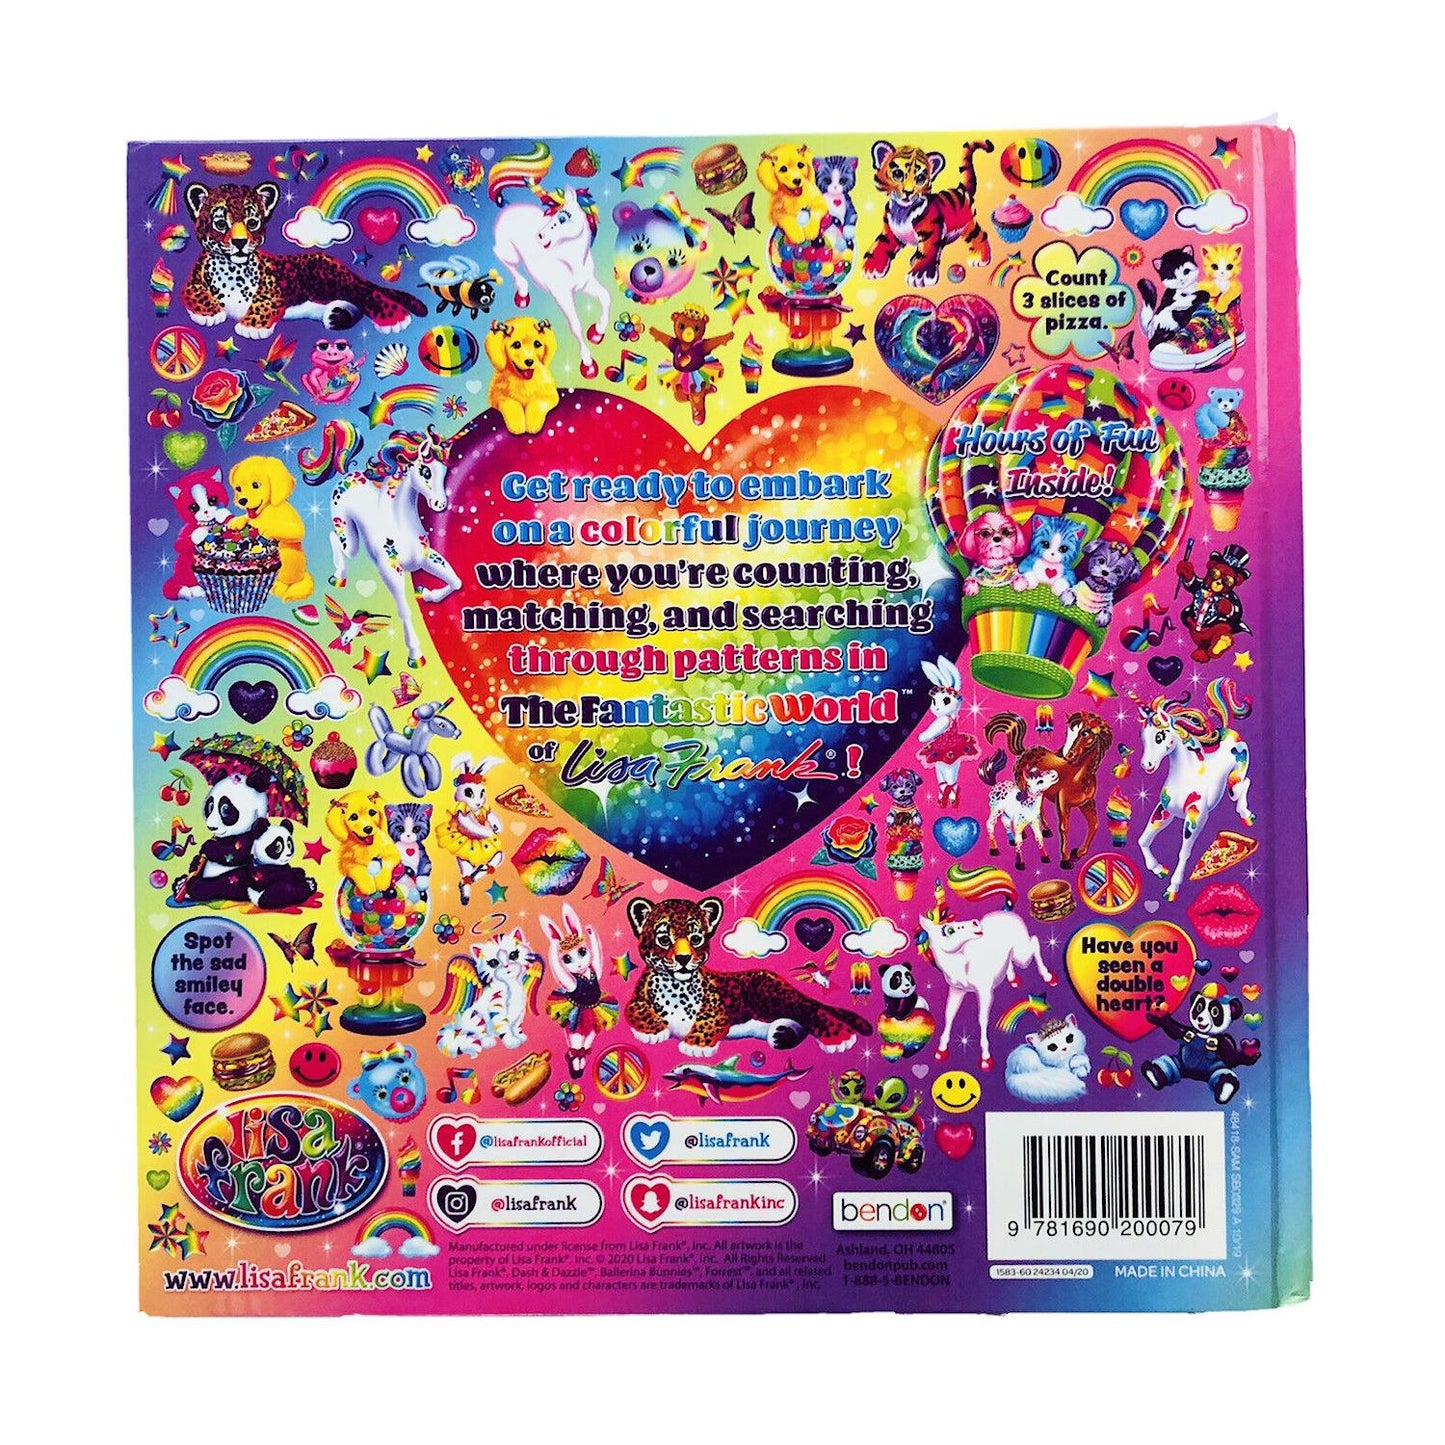 Lisa Frank Puzzle Game Book - Lisa Frank Puzzle Pictures, Hidden Pictures, Lisa Frank Find It Fun